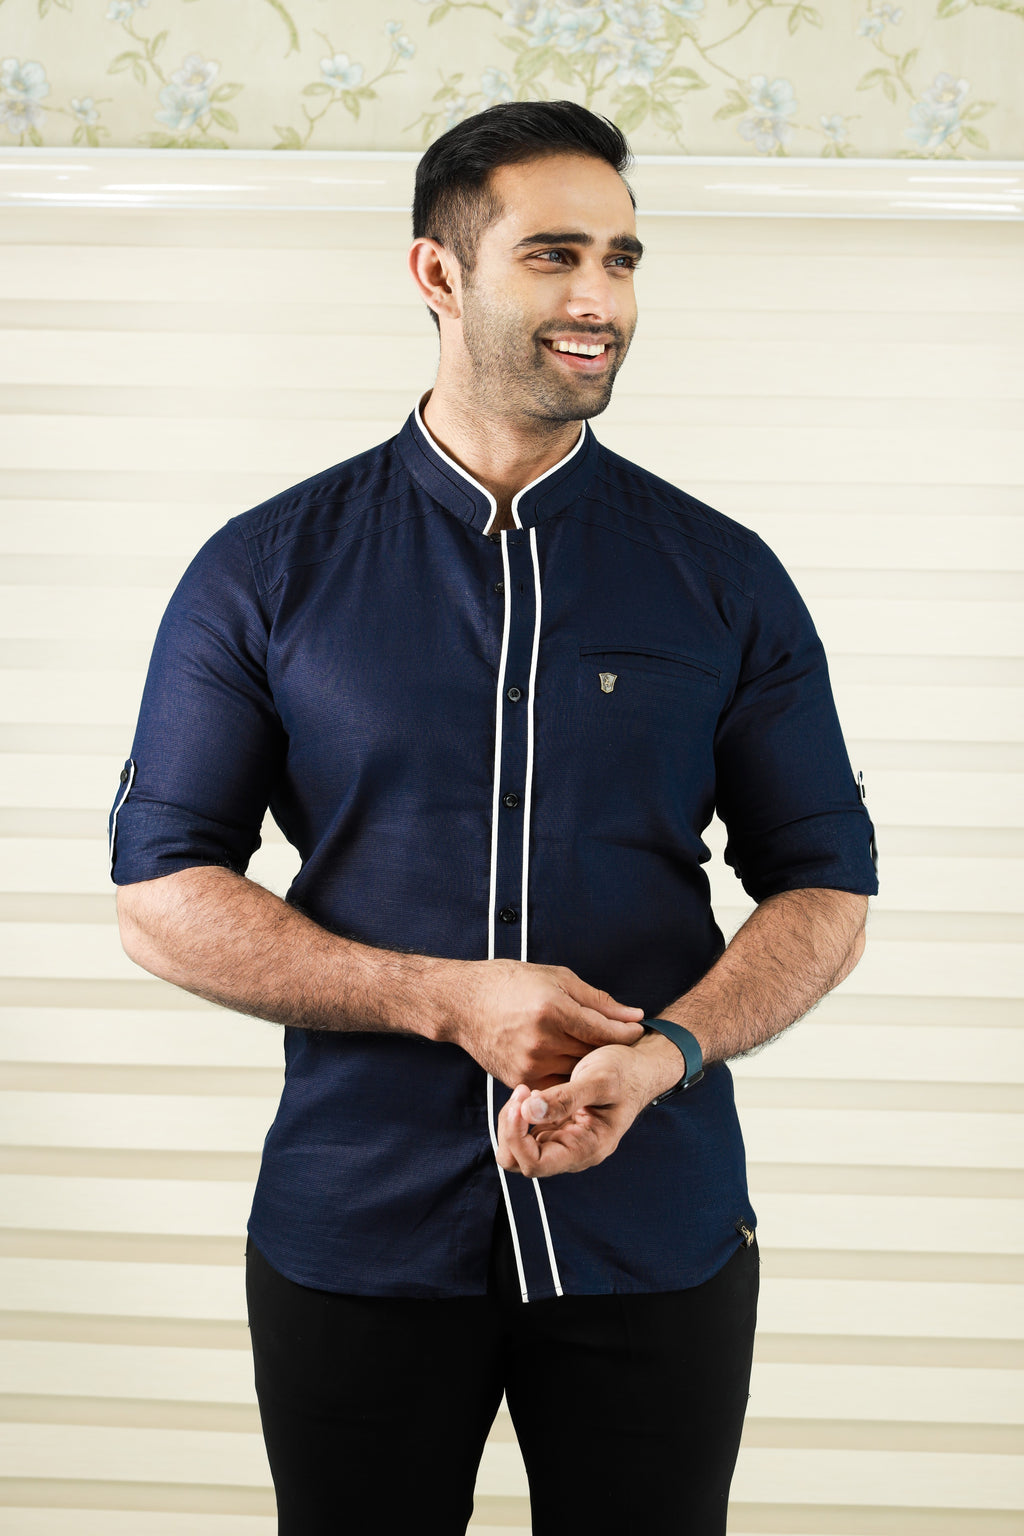 Man in blue dress shirt and black pants standing near white wall photo   Free استان تهران ایران Image on Unsplash